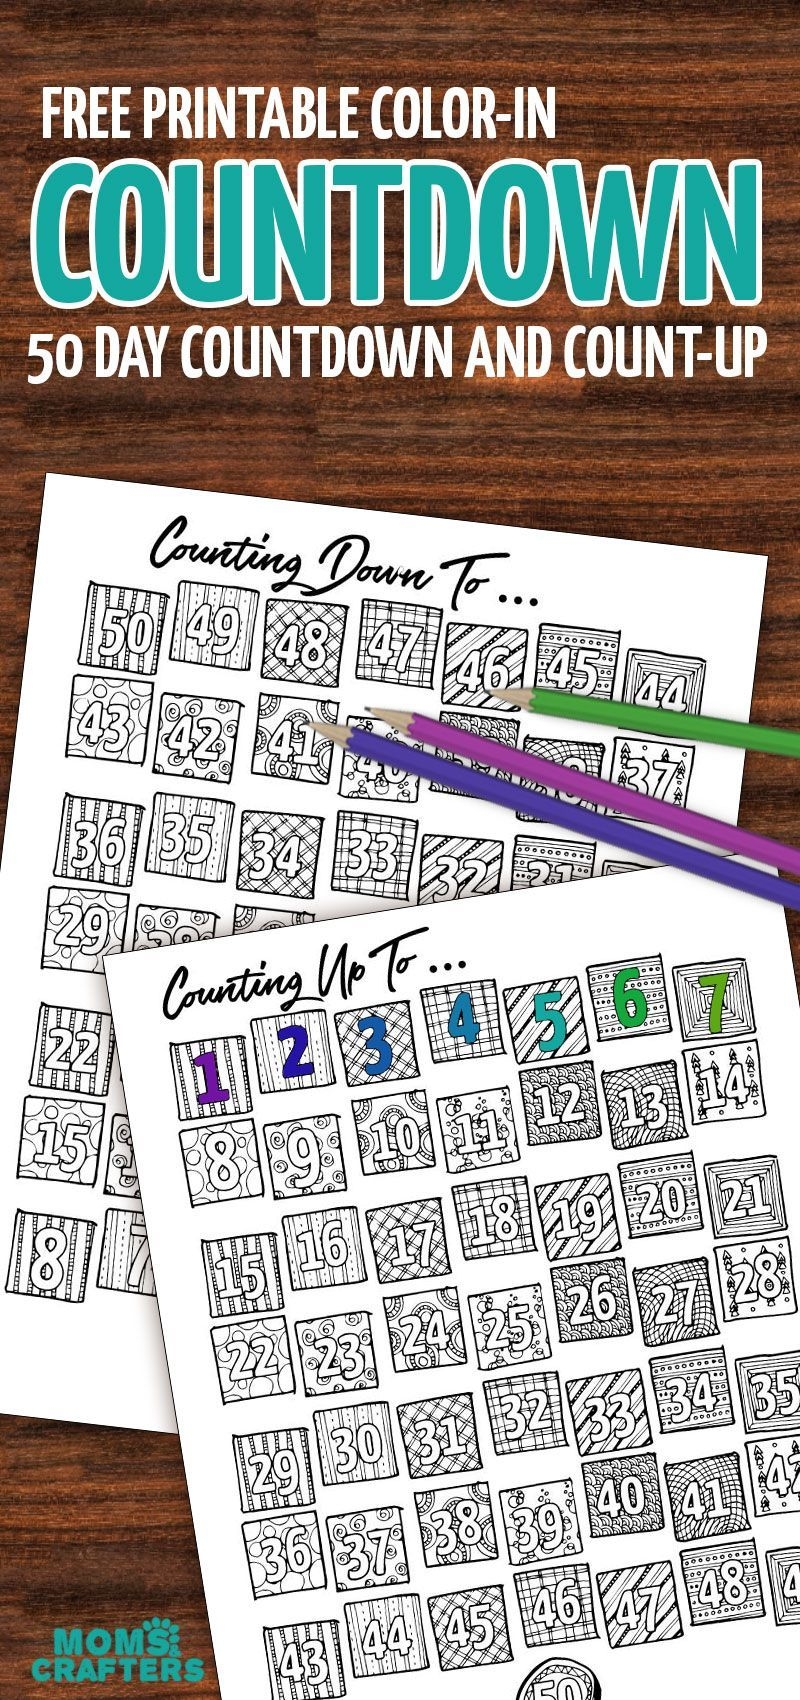 Grab This Fun Color-In Countdown And Progress Tracker